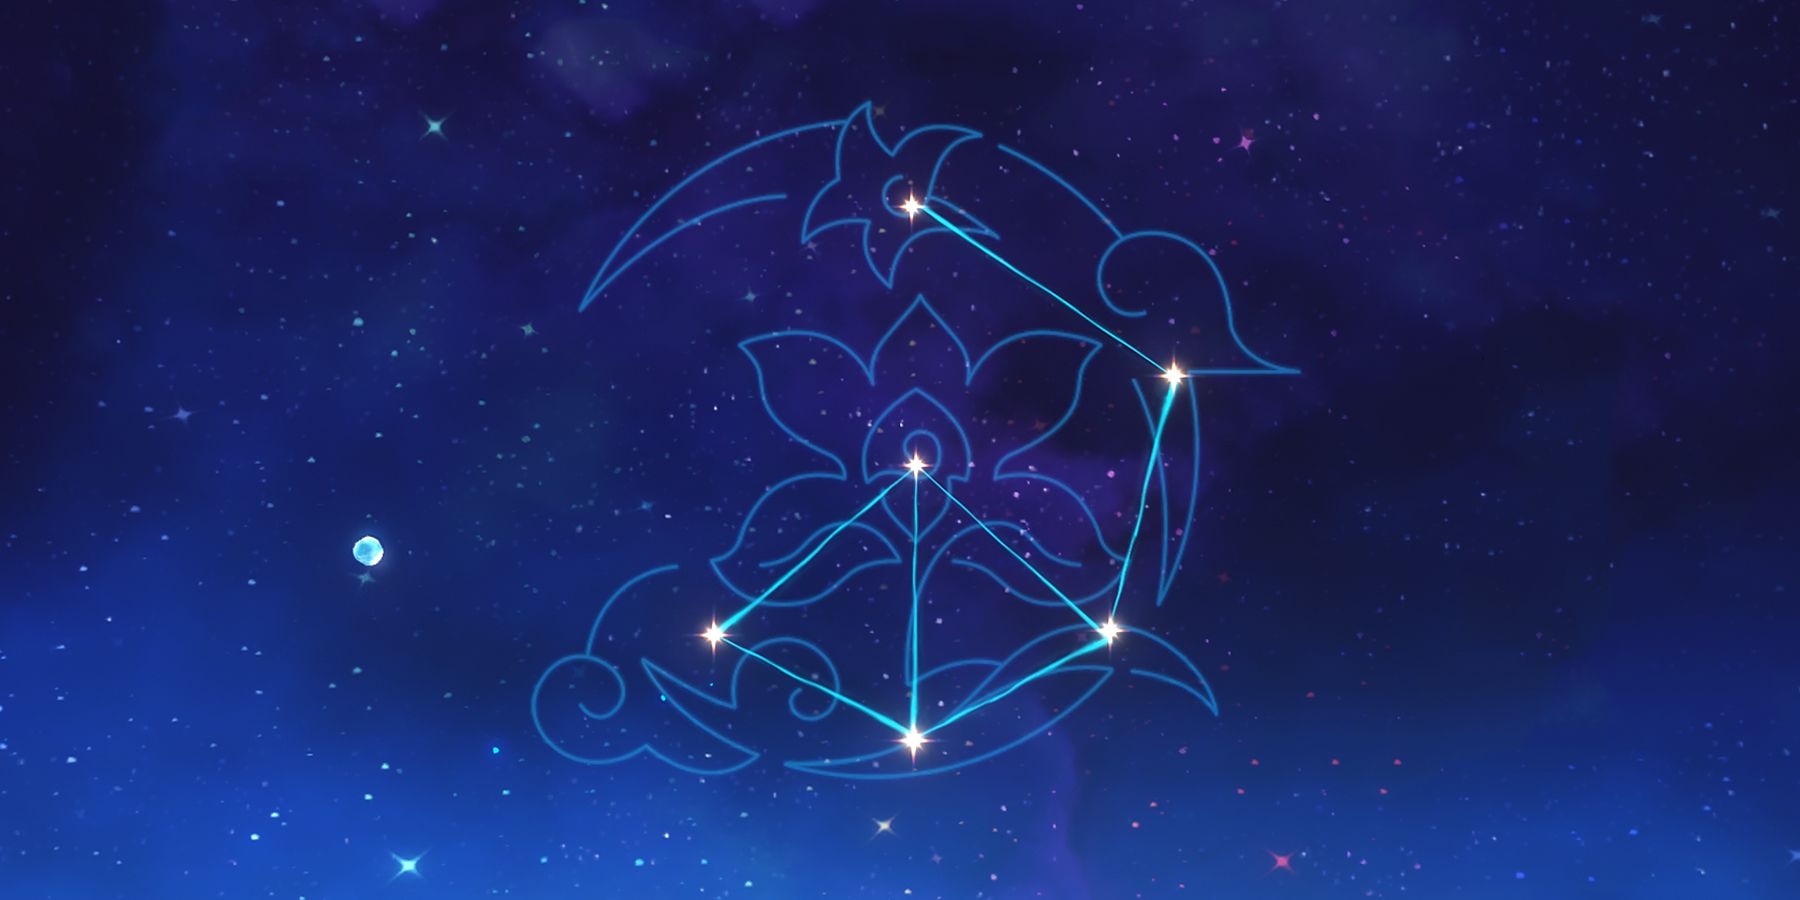 Guide ] Genshin Impact Overview: Yelan Constellations, Talents